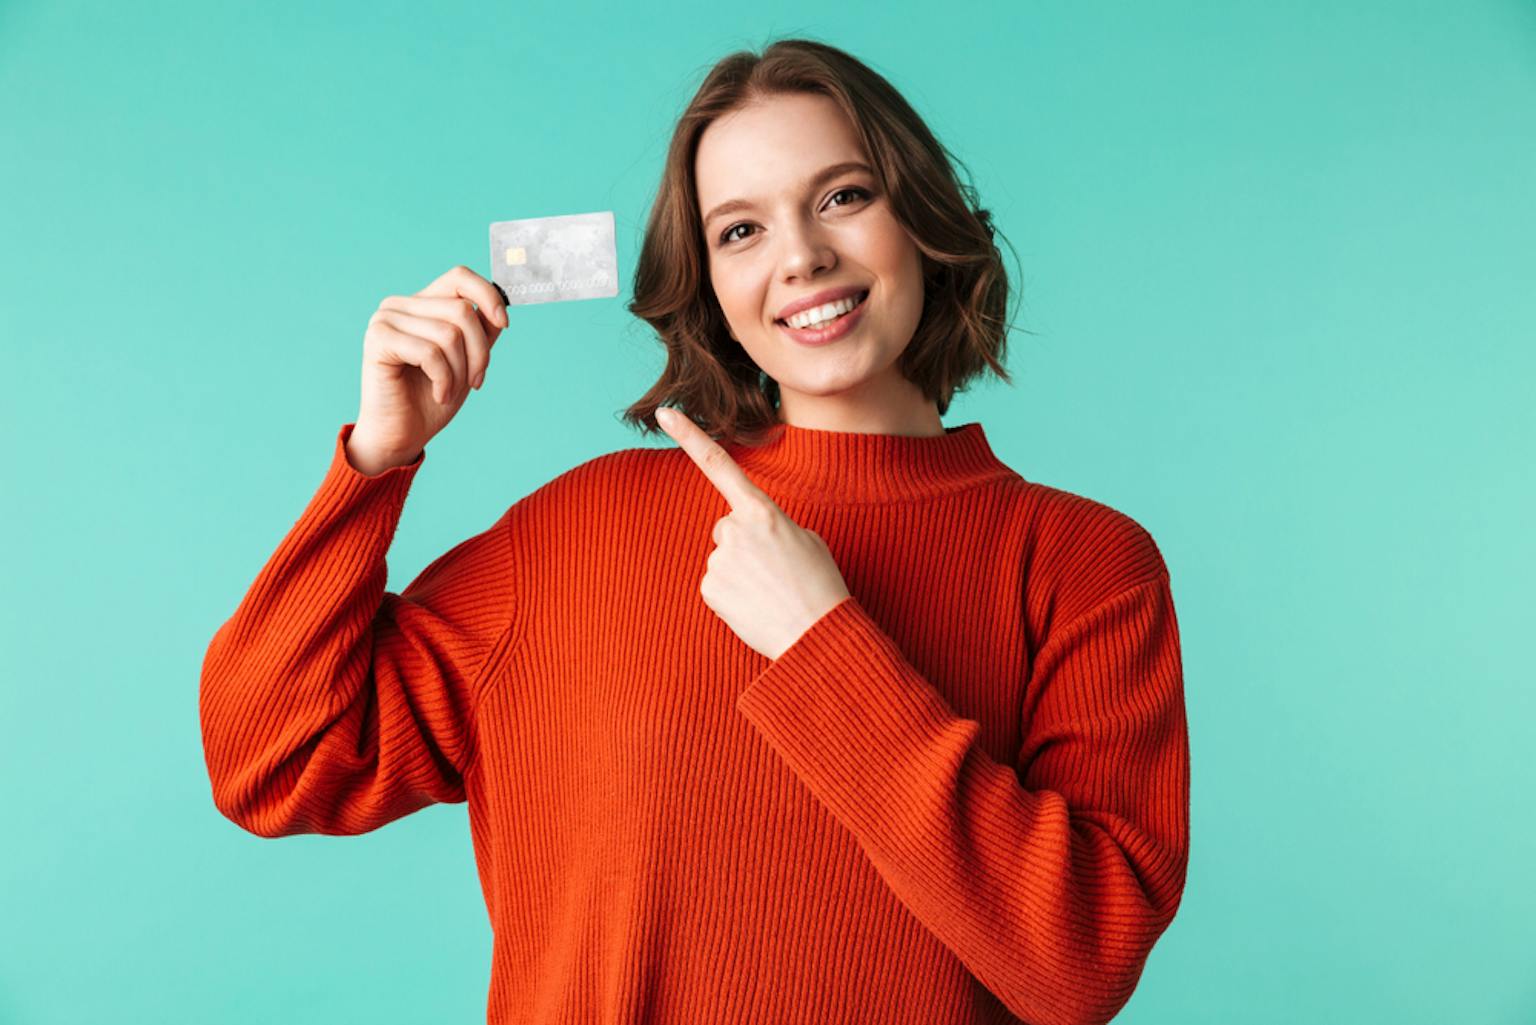 5 Best Ways Your Credit Cards Can Save You Money